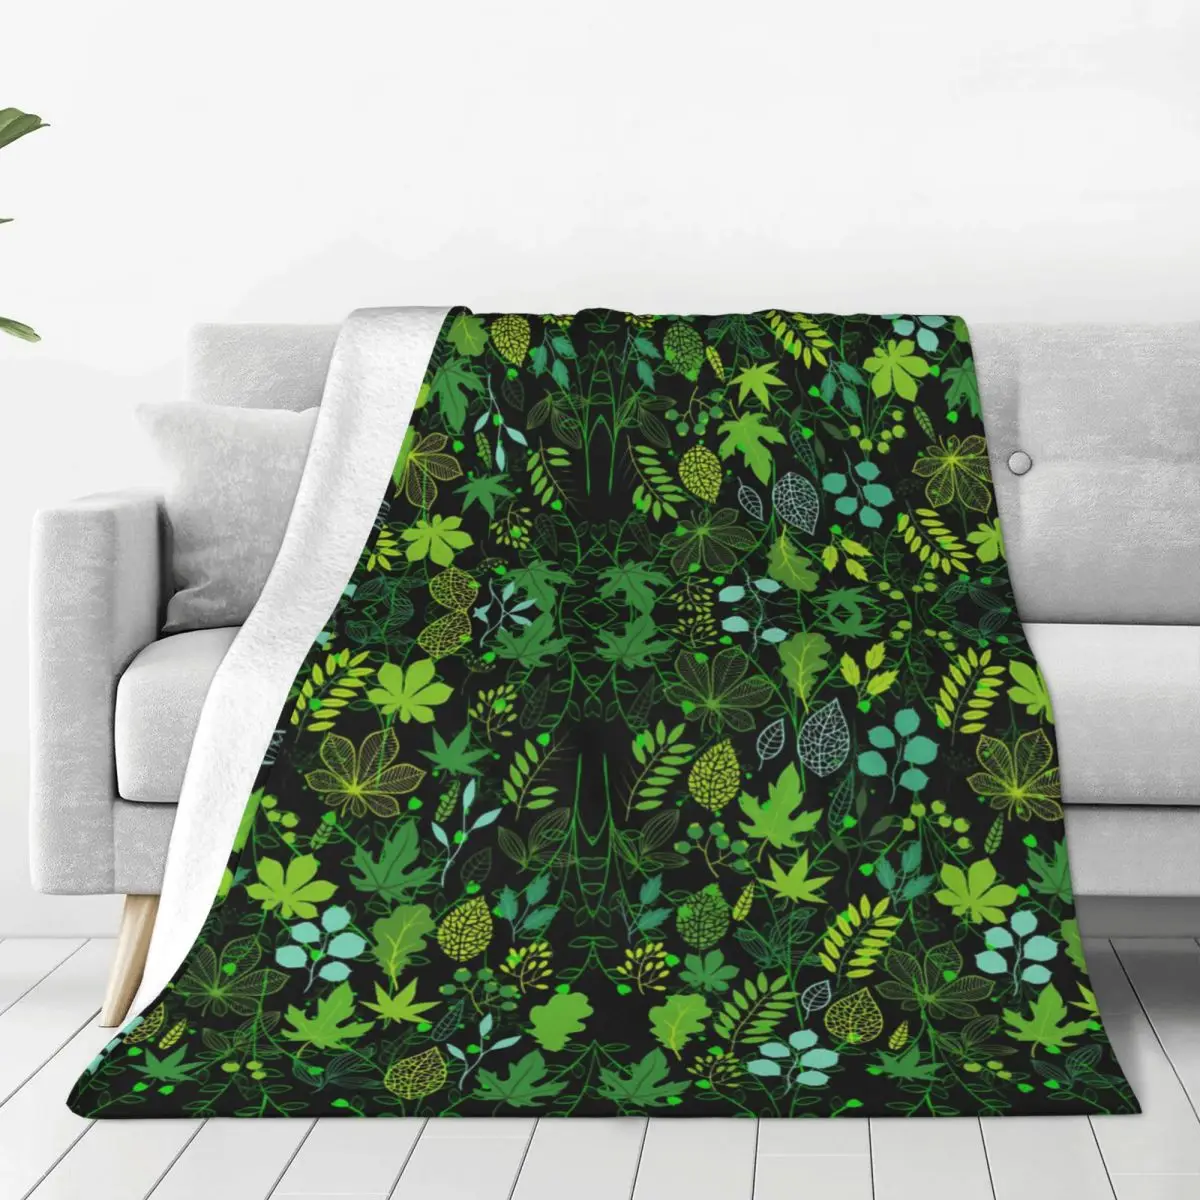 

Plant Print Flannel Blanket Green Leaves Super Soft Bedding Throws for Living Room Travel Office Cute Bedspread Sofa Bed Cover